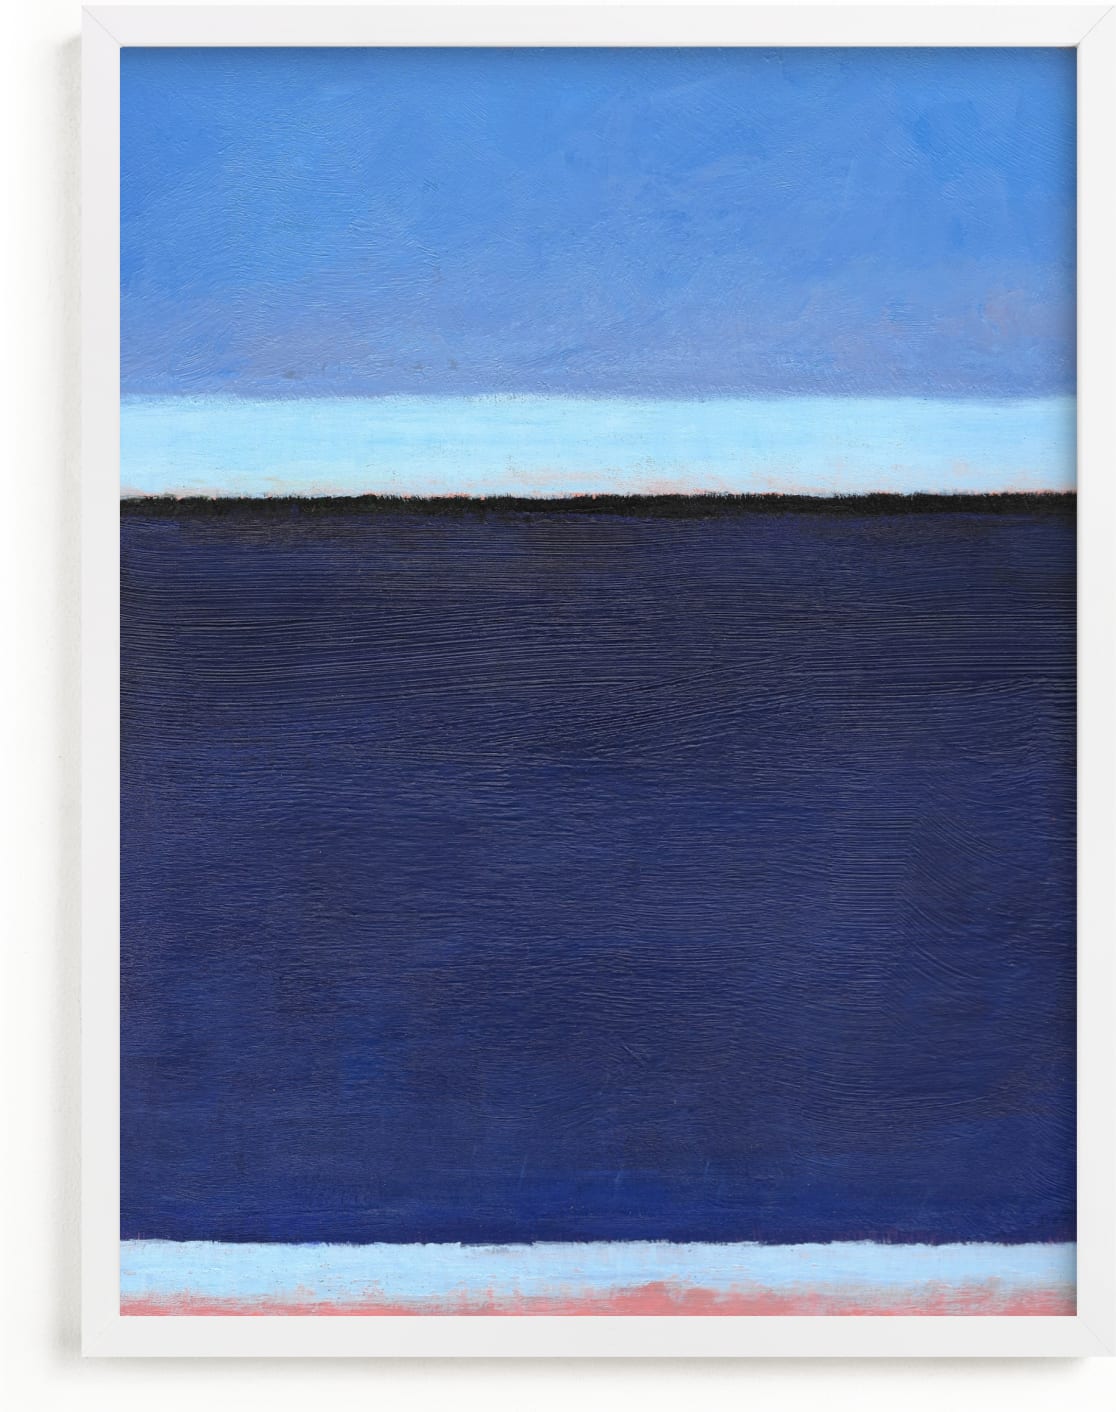 This is a blue art by Carol C. Young called Deep Blue Bay.